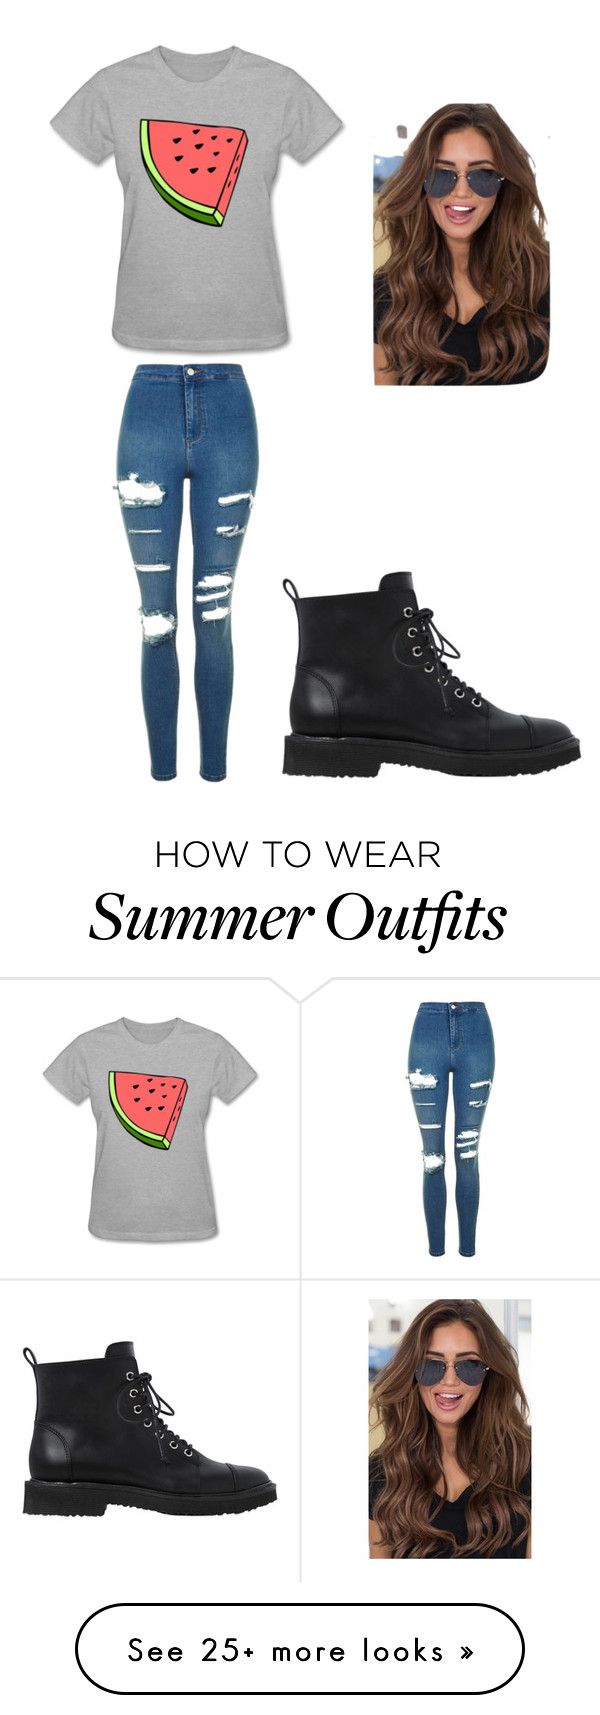 "summer outfit" by ilovebeinglazy234 on Polyvore featuring Topshop and...